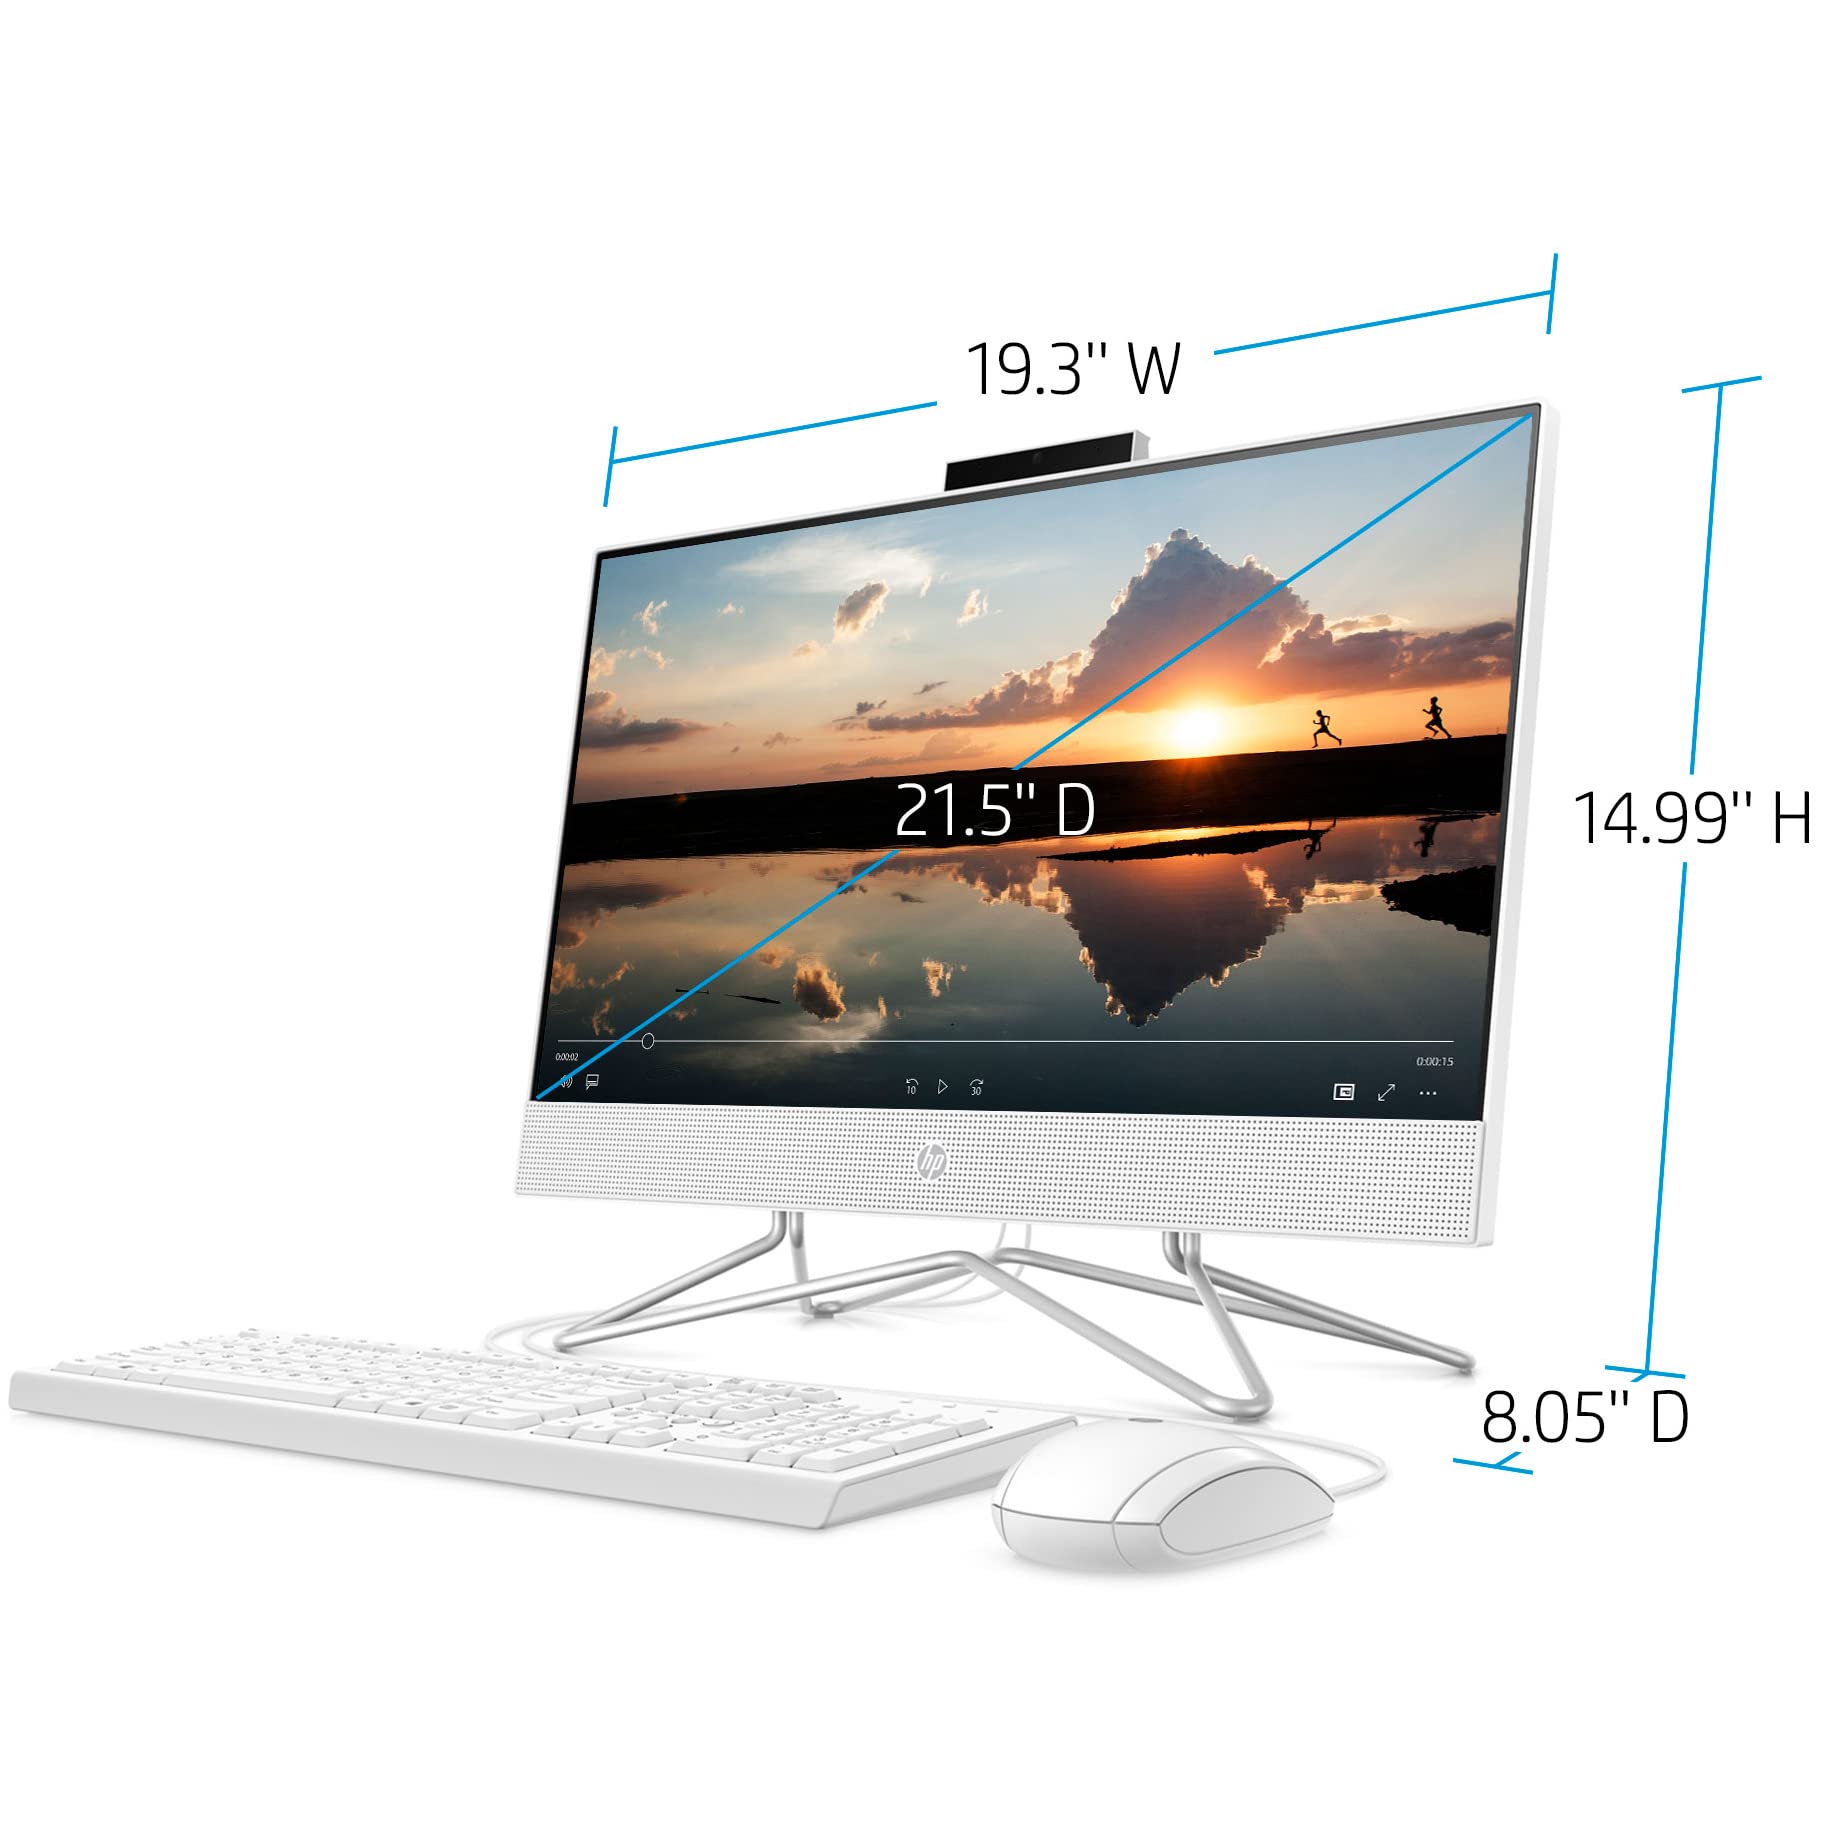 HP 22 AIO 21.5" FHD Business All-in-One Desktop Computer, Intel Celeron J4025 Up to 2.9GHz, 16GB DDR4 RAM, 512GB PCIe SSD, WiFi, Bluetooth, Keyboard and Mouse, Windows 11 Pro